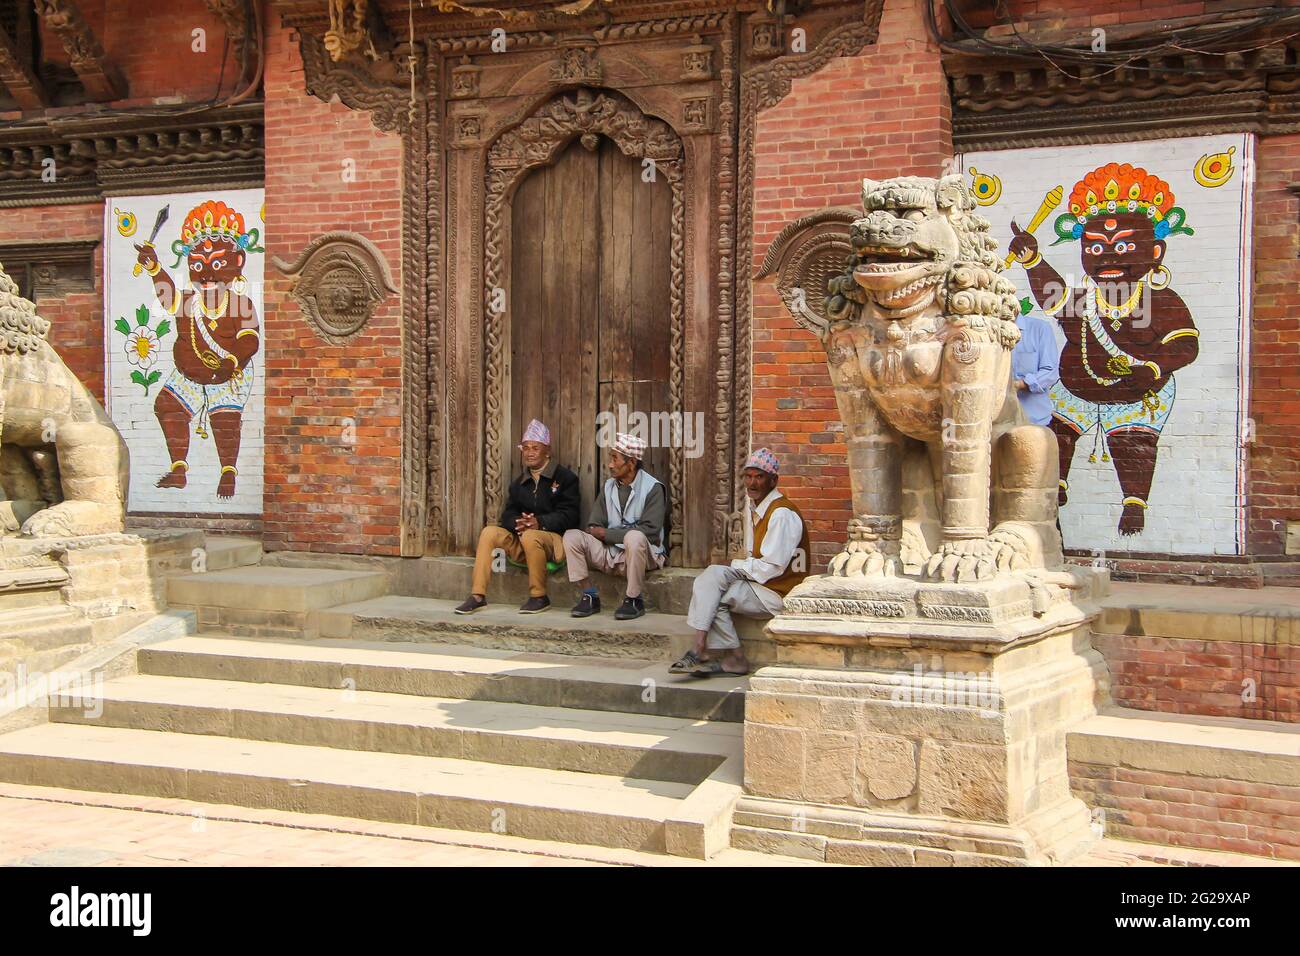 A group of Nepali men relax outside a historic building in Patan, Kathmandu, Nepal. They are wearing the dhaka topi - the traditional Nepali hat. Stock Photo